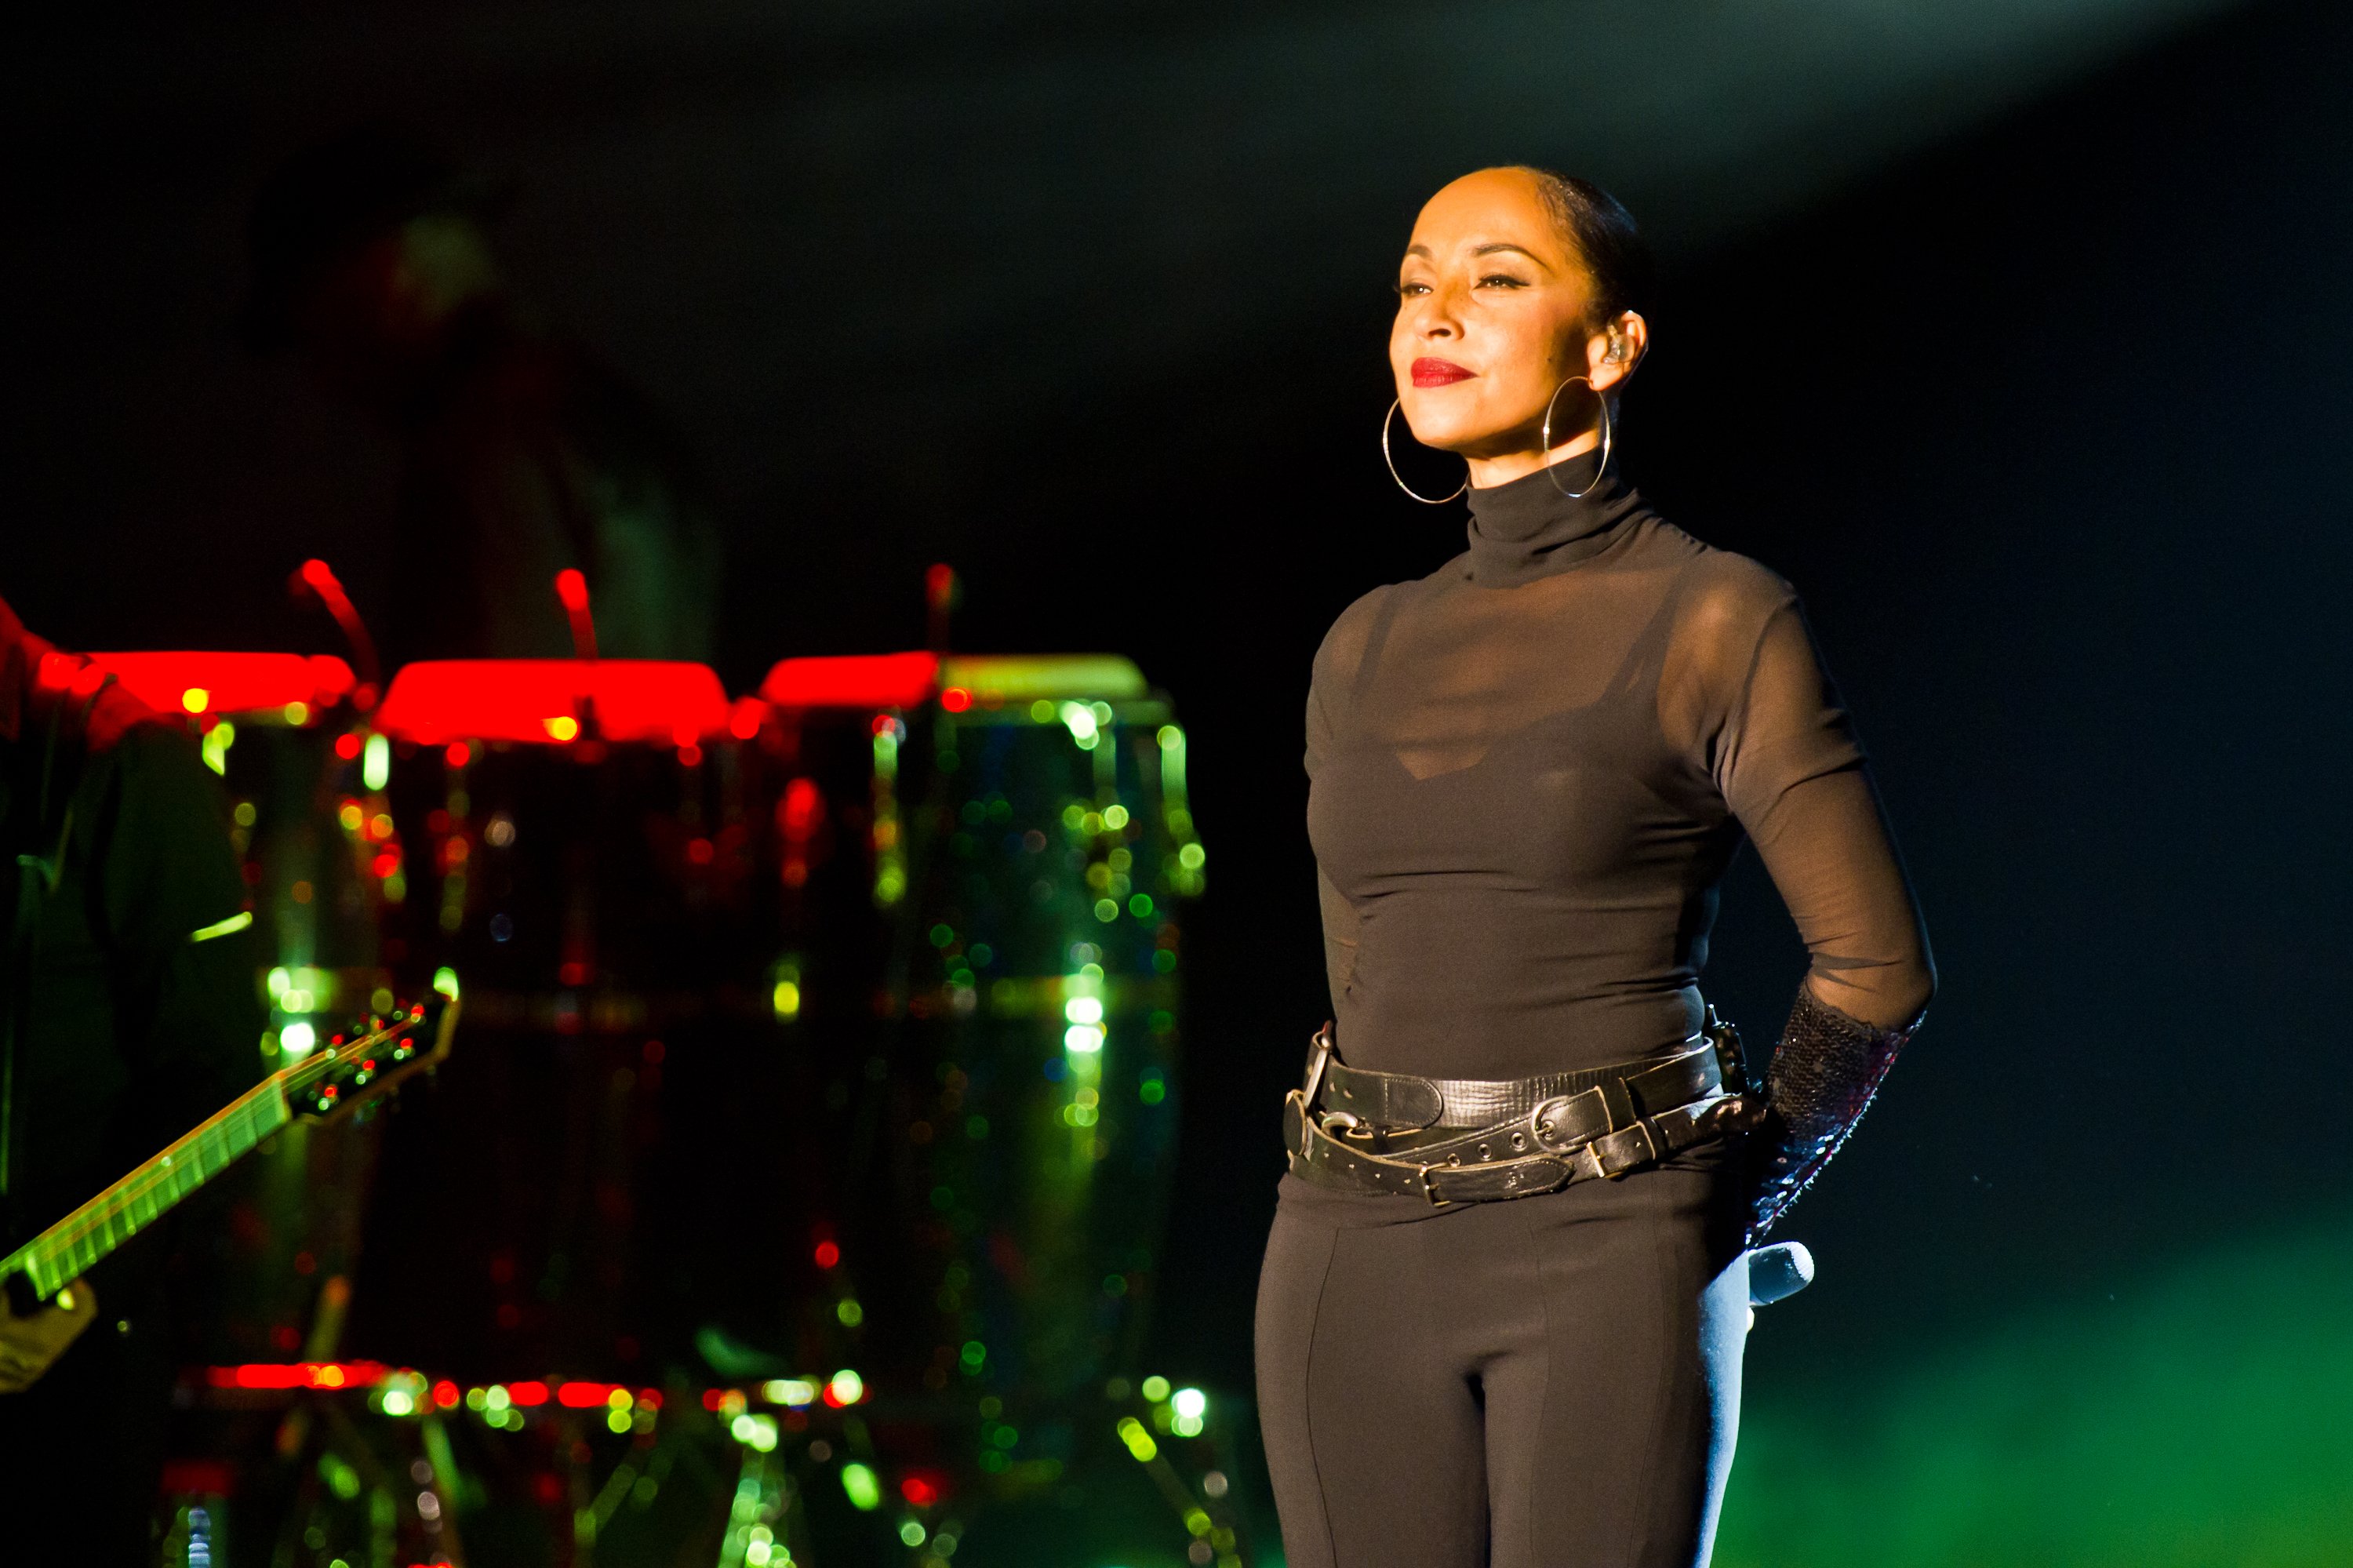 Sade performs at Palais Omnisports de Bercy on May 17, 2011, in Paris, France. | Source: Getty Images